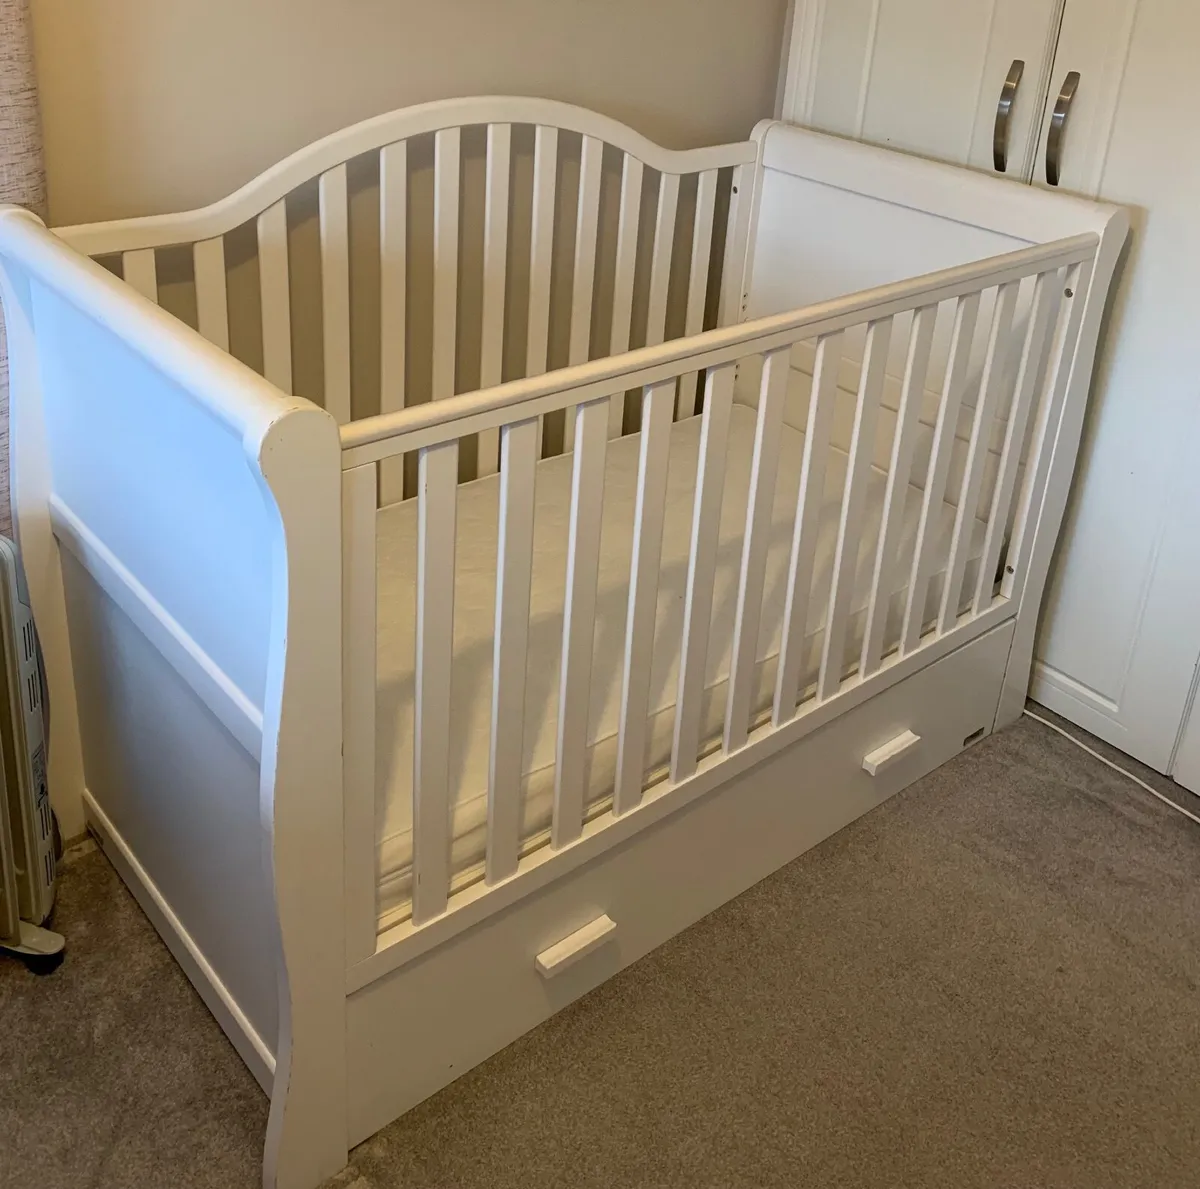 Oslo sleigh cot bed